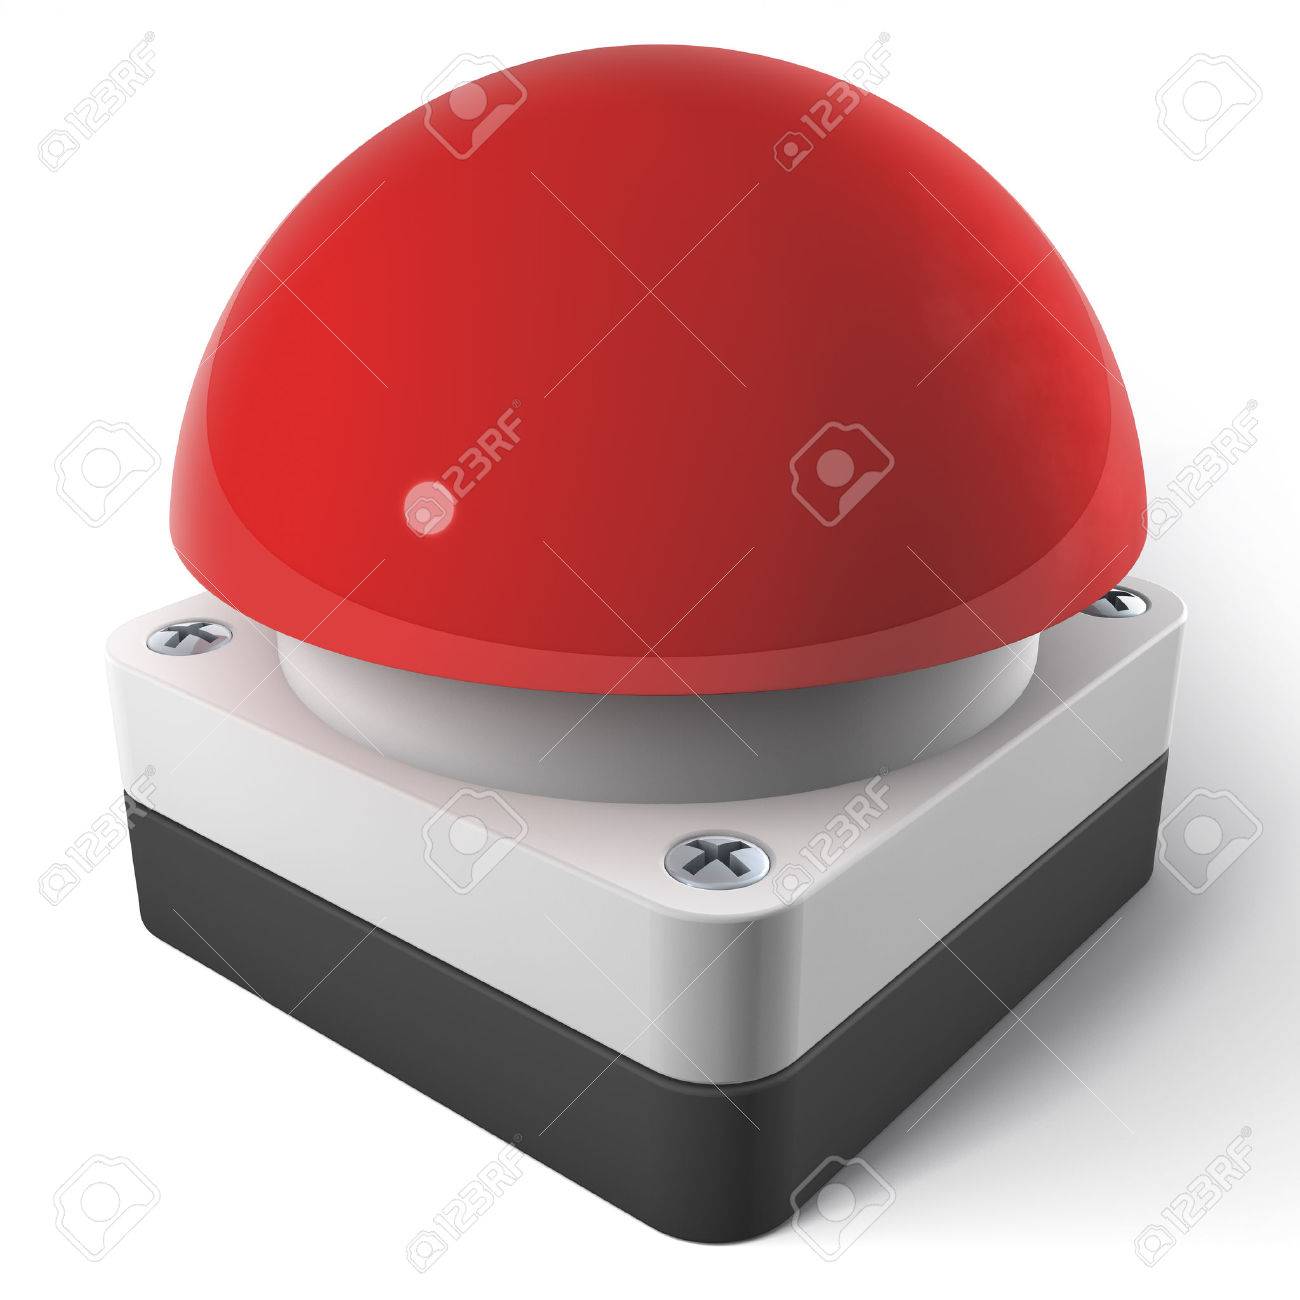 Red Gameshow Buzzer 3d Rendering Isolated On White Background